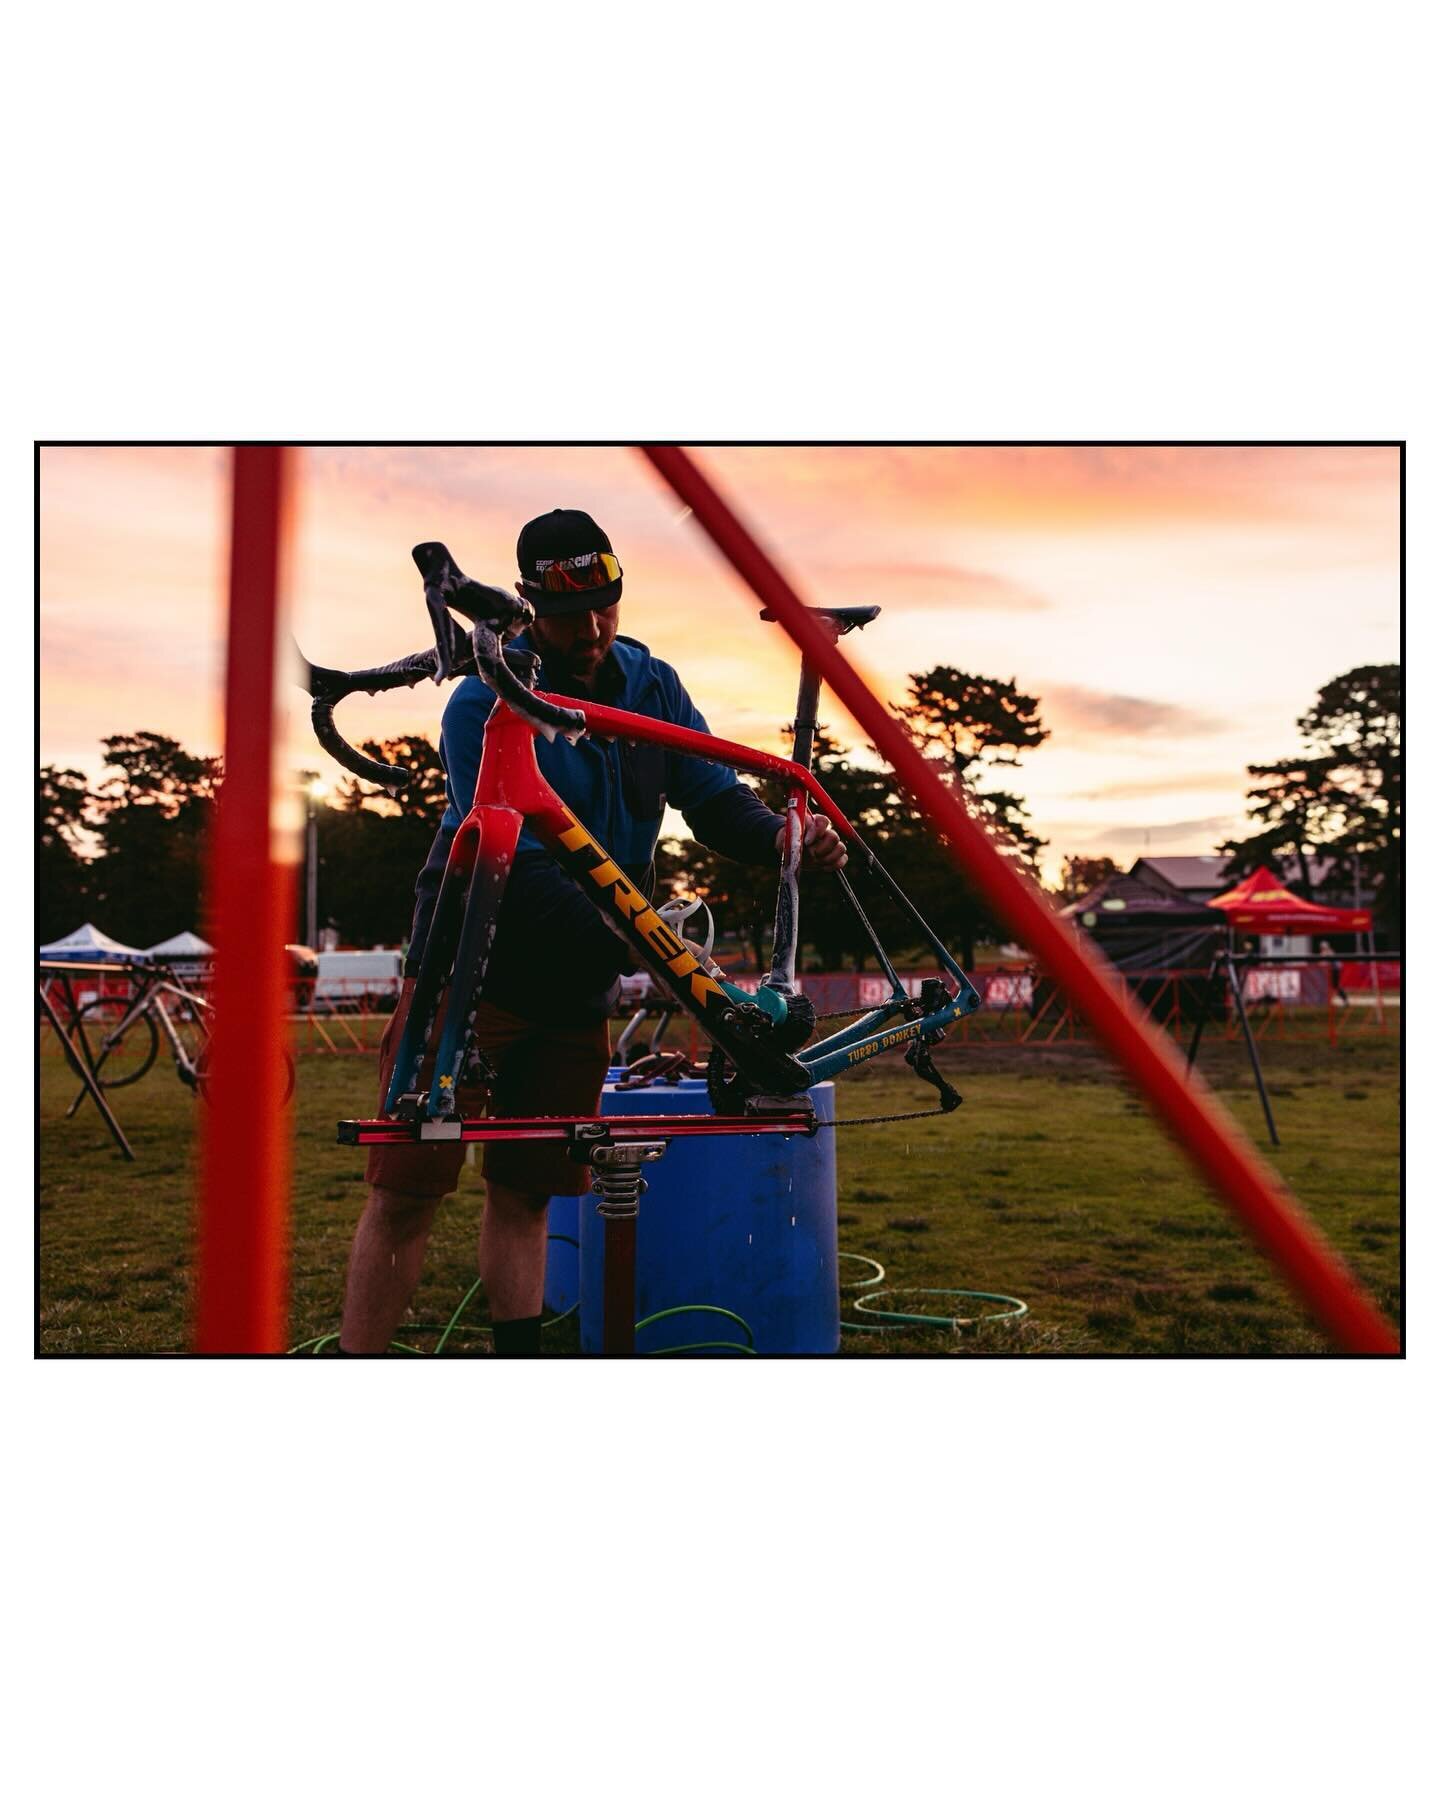 It&rsquo;s the behind the scenes of a cross race that does it for me. The last minute tire changes, lightning fast repairs, early mornings and late nights and everything in between that keeps cyclocross moving is always one of my favorite parts to wi